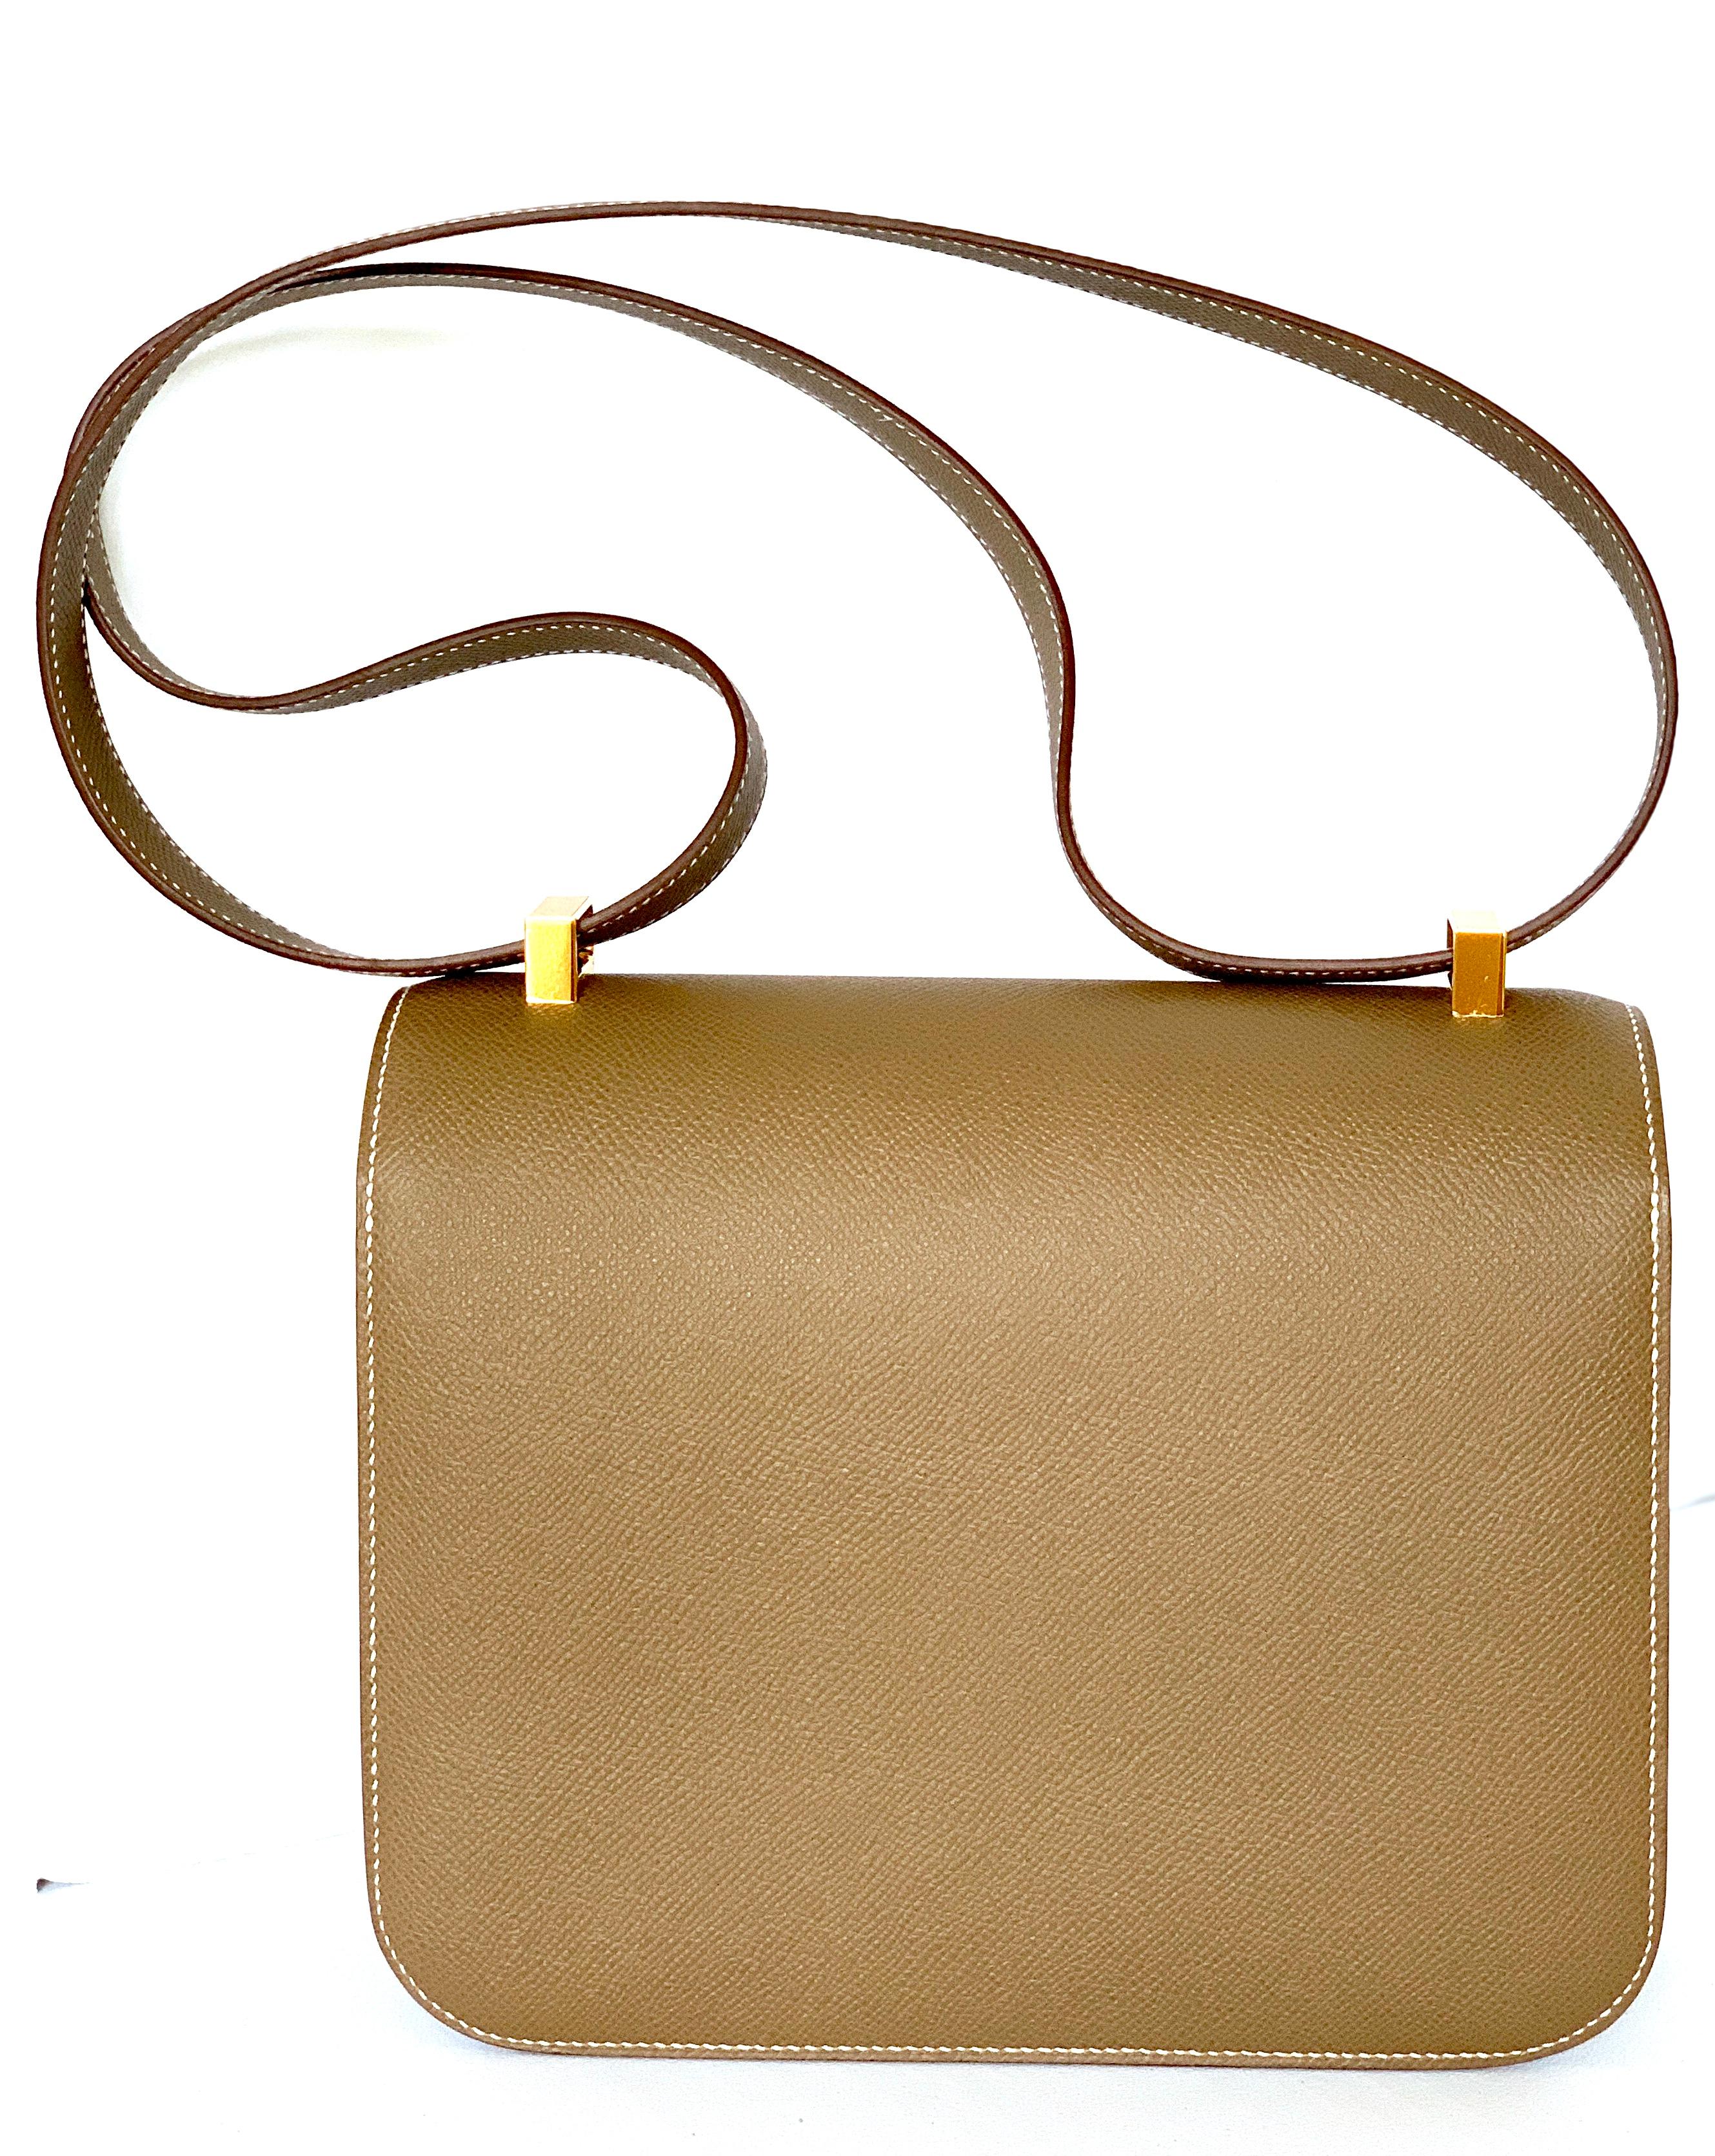 HERMES CONSTANCE BAG
Size 24cm
Etoupe Epsom Leather
Gold Hardware
Brand new 
Plastic on the Measurements
Length: 9 in
Width: 3 in
Height: 7.75 in
Drop: 17.25 in
COLLECTION C



Comes ready for gift giving, Hermes Box, Tissue, Felt 